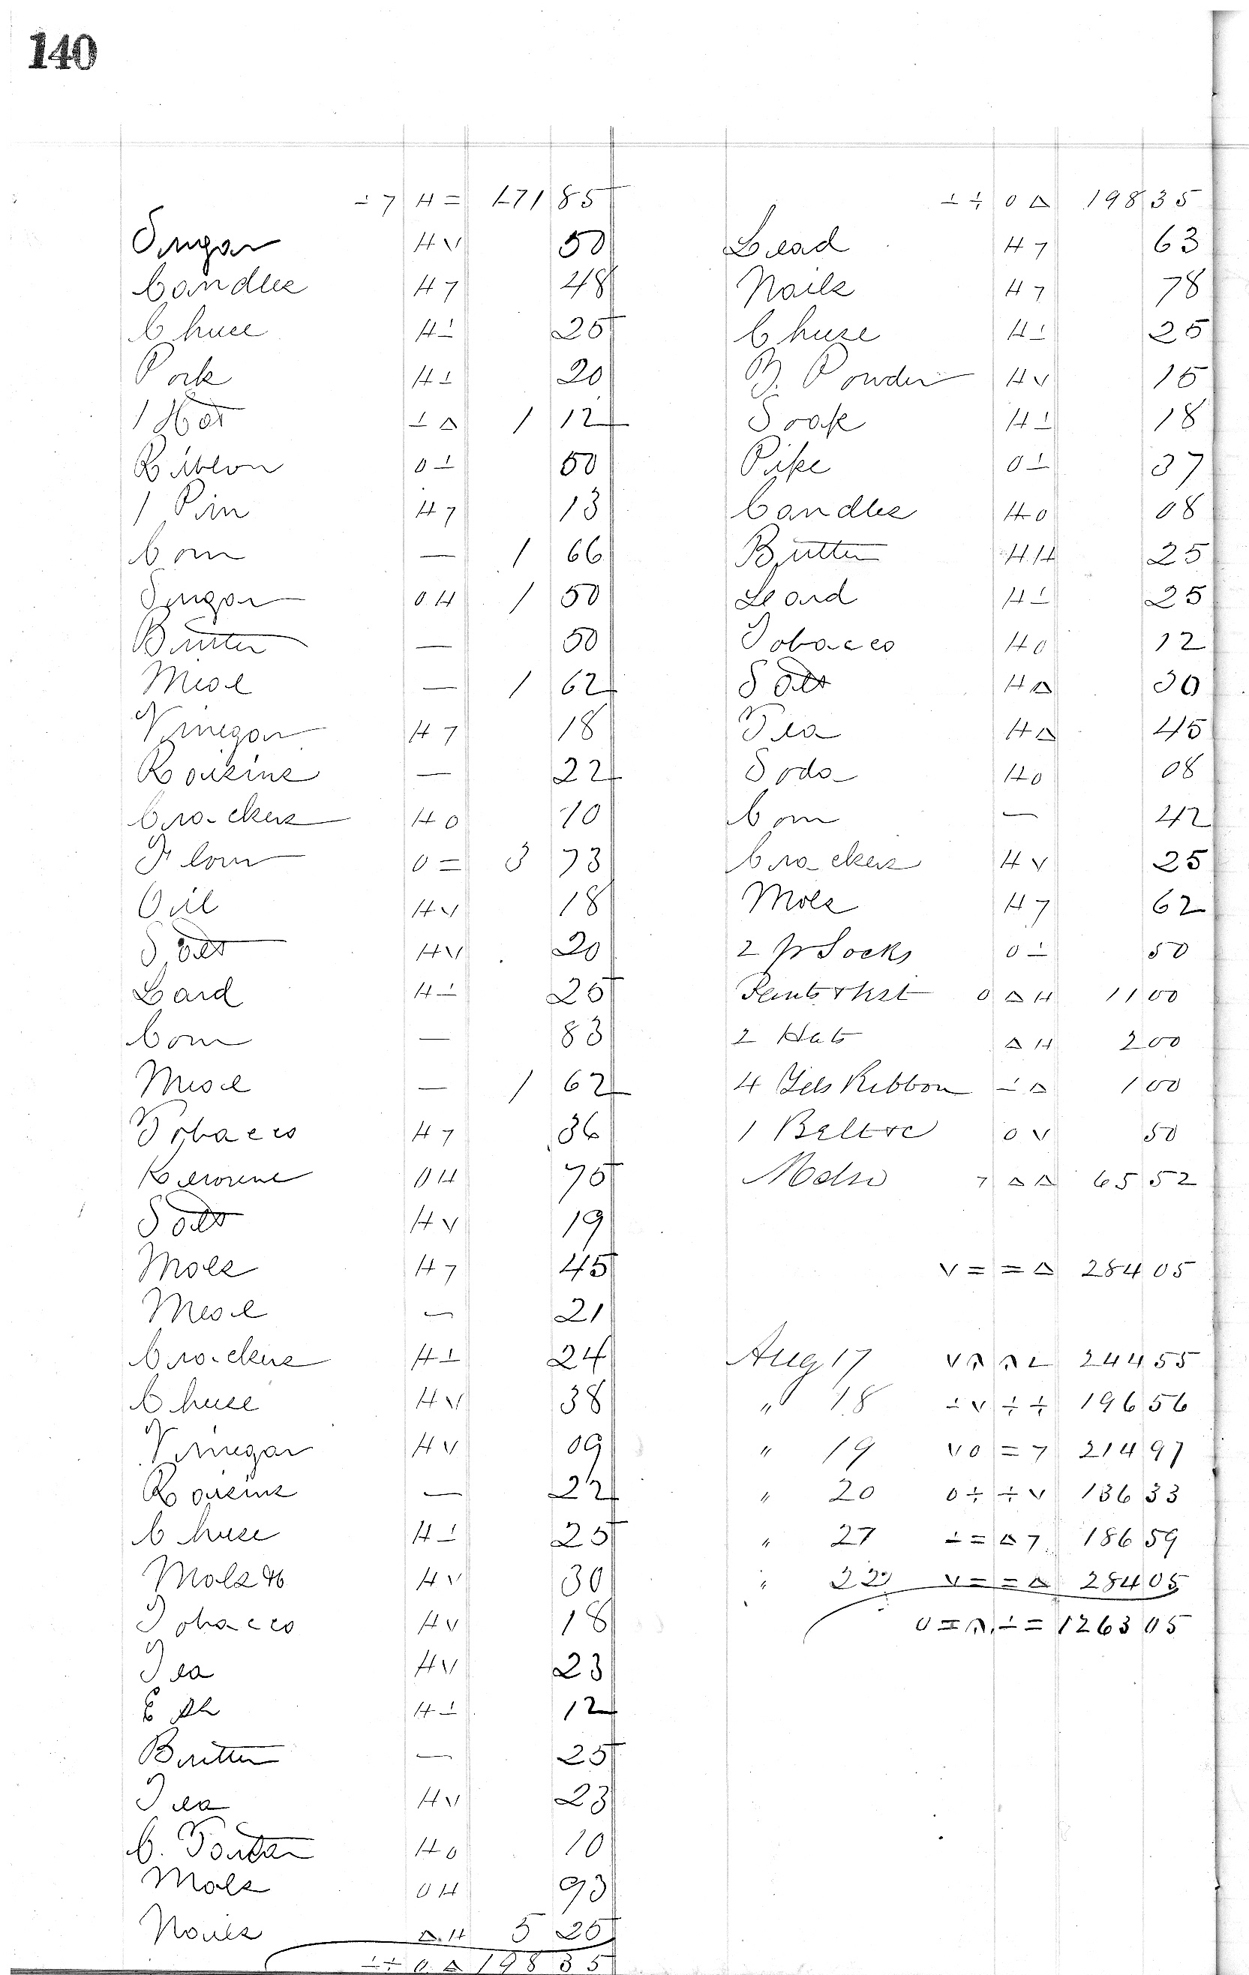 Page 140 from H.K. Keith's 1863 register of daily sales